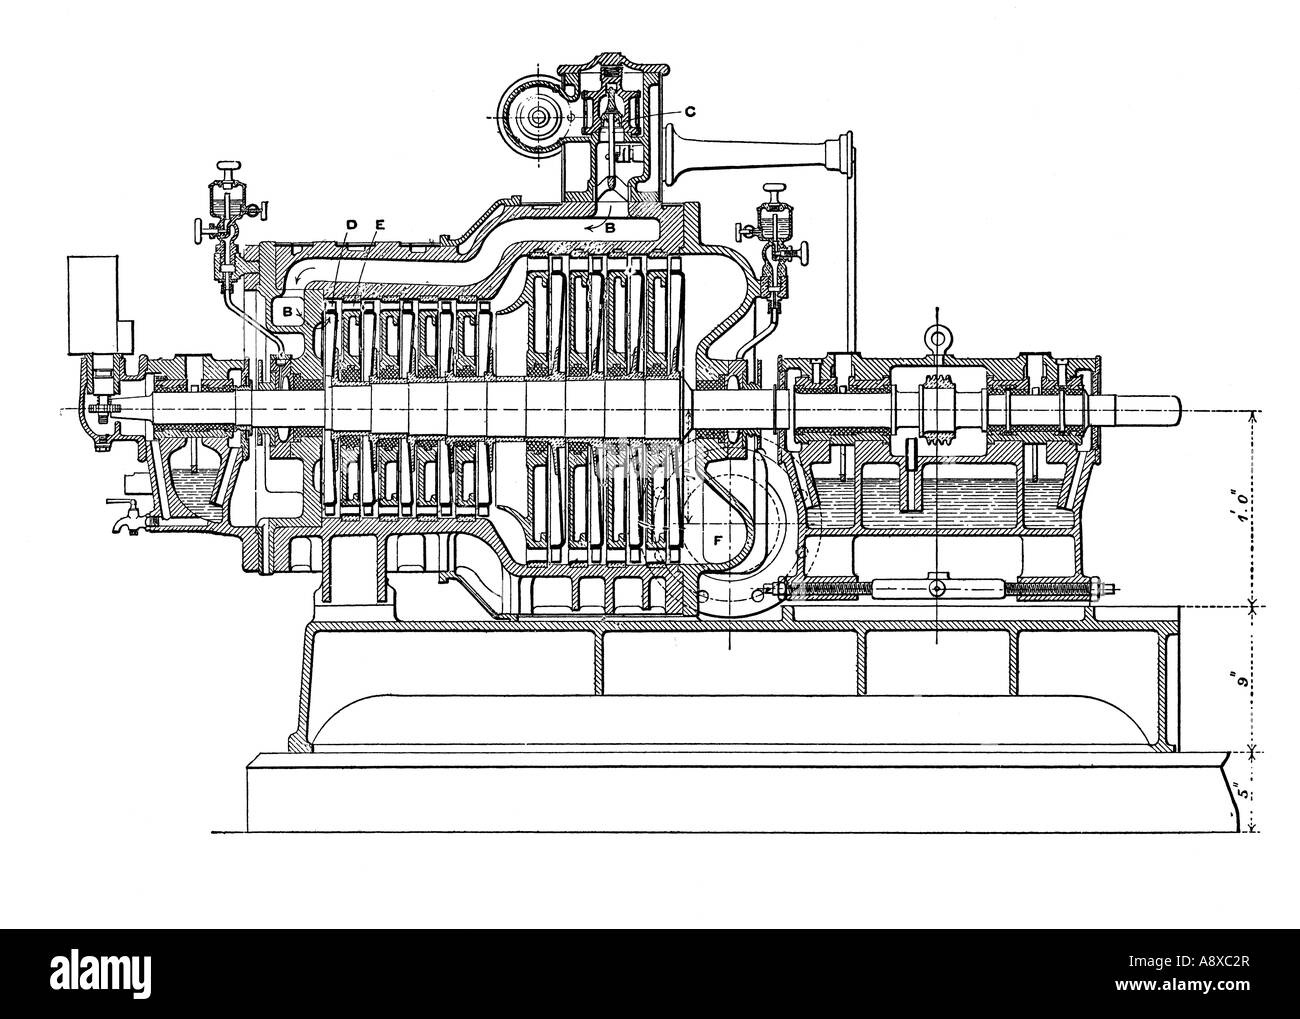 axial flow steam turbine sectional draw 